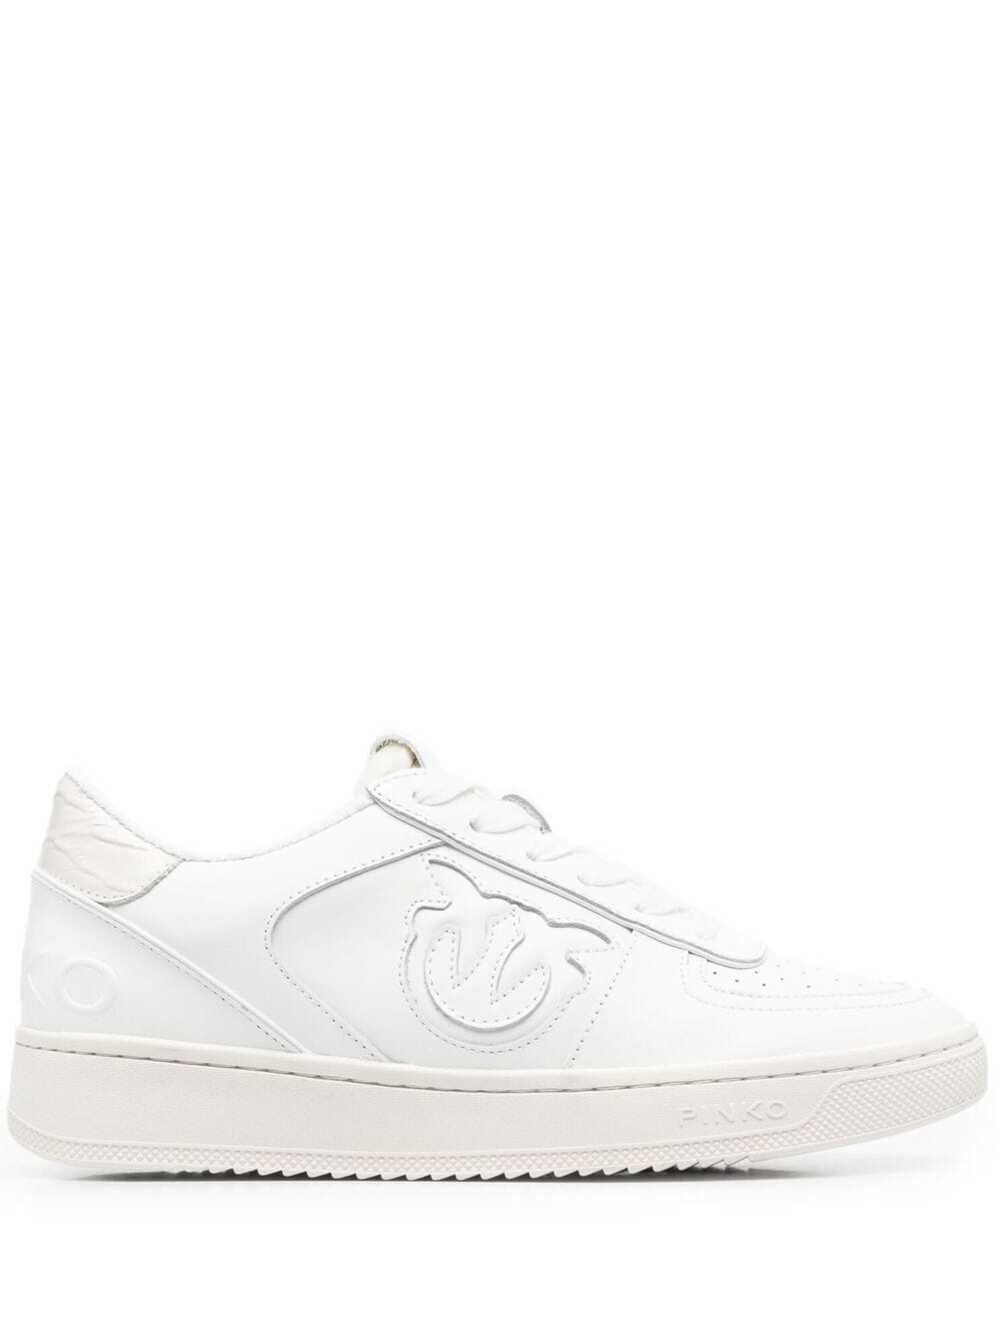 Pinko White Sneakers In Calf Leather And Rubber With Contrast Inserts Love Birds Logo Customization Carved On Both Sides, Flat Rubber Sole